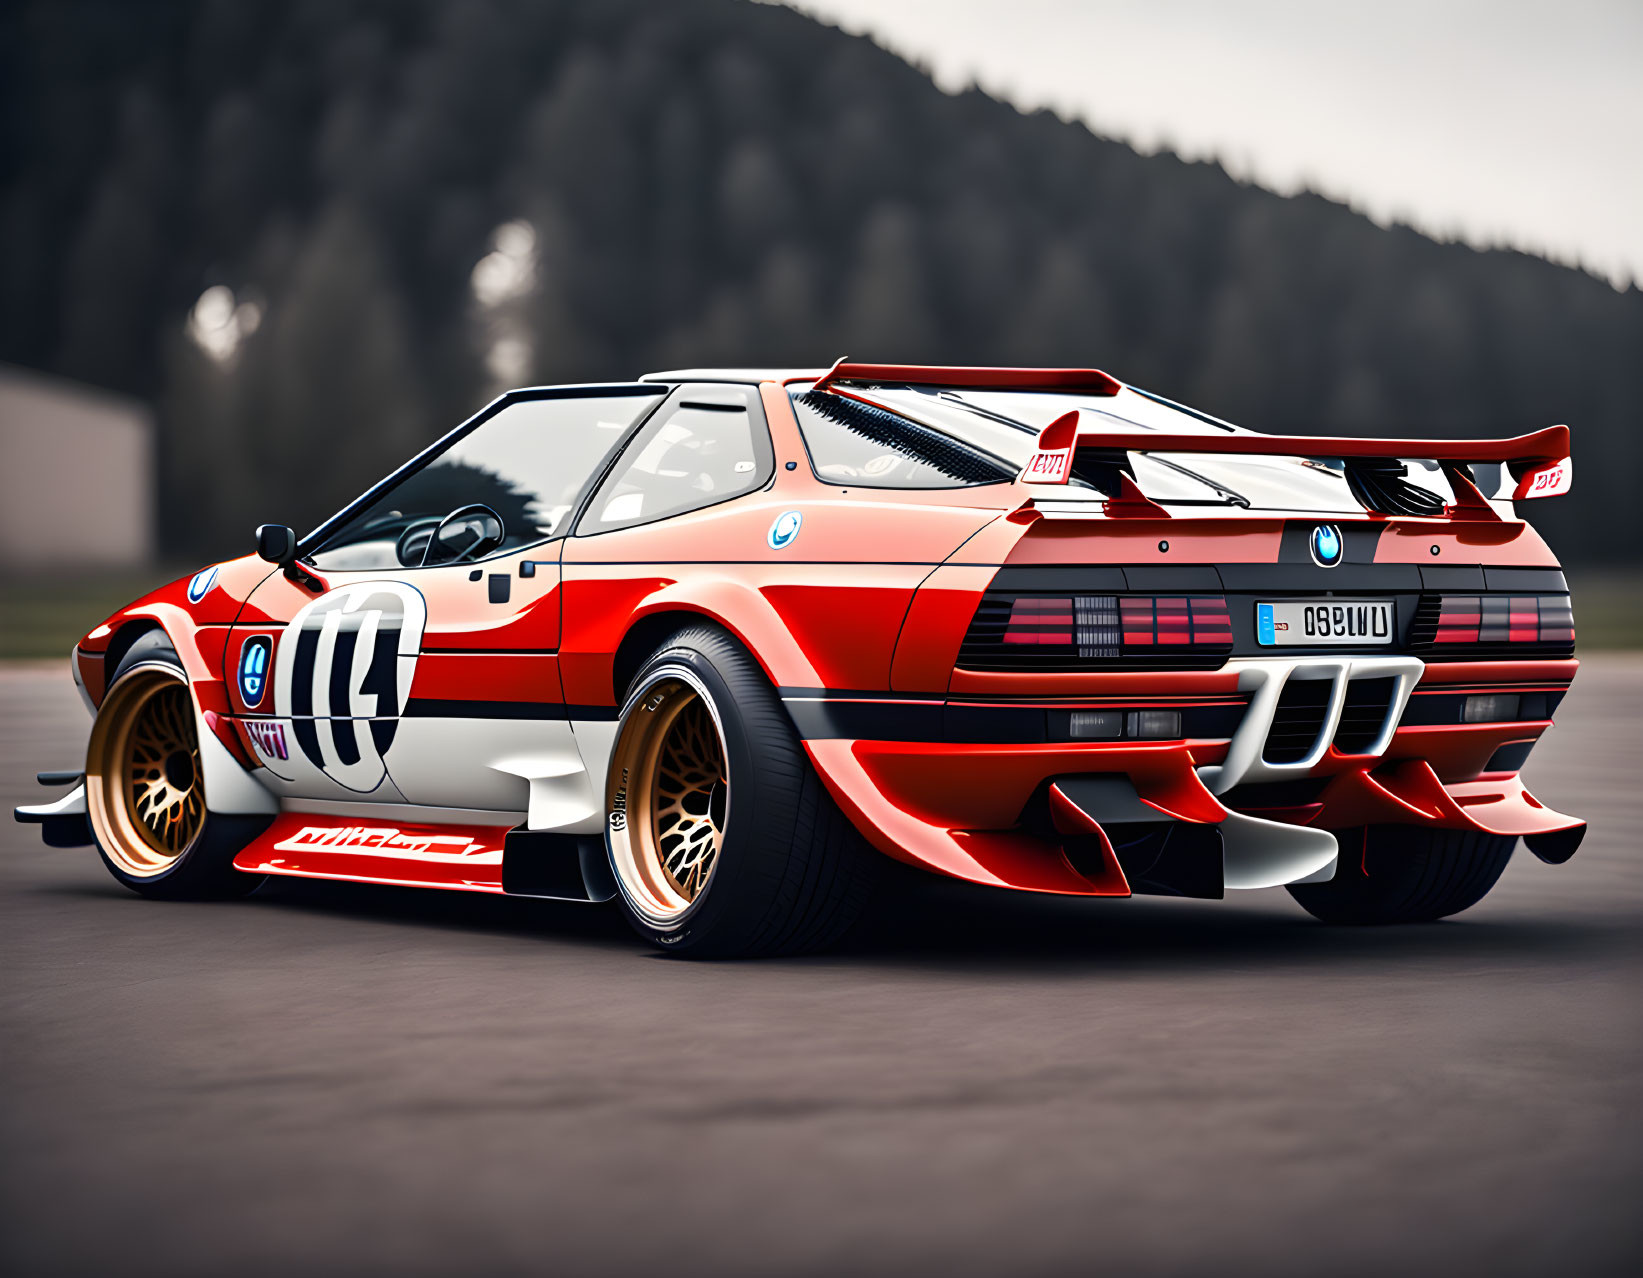 Vintage BMW M1 Procar Race Car with Red & White Livery